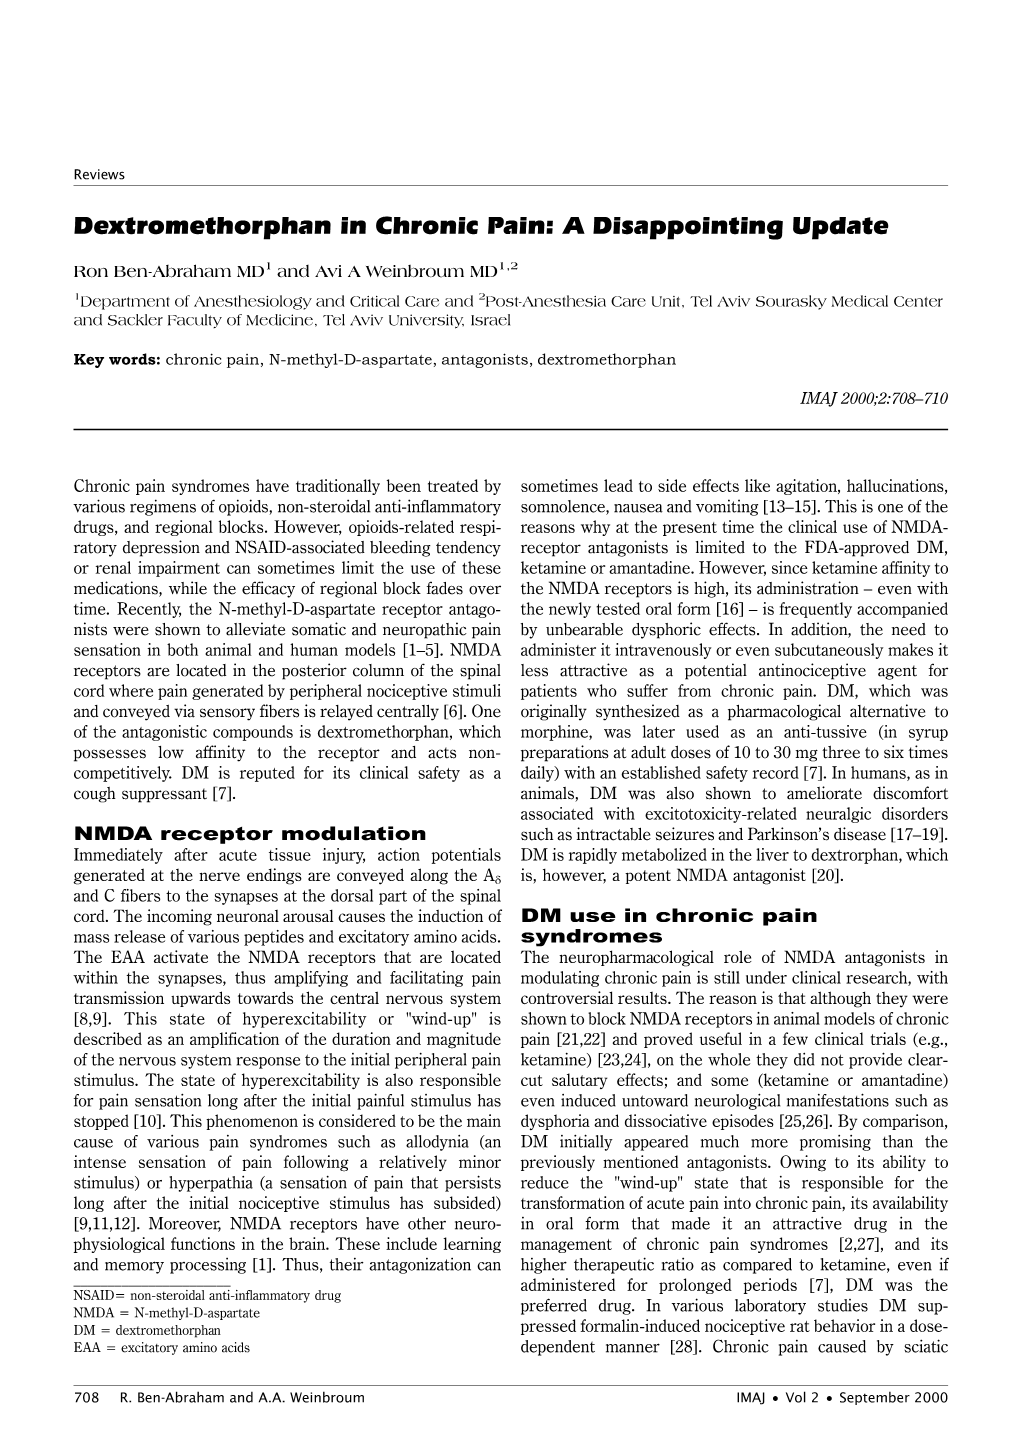 Dextromethorphan in Chronic Pain: a Disappointing Update